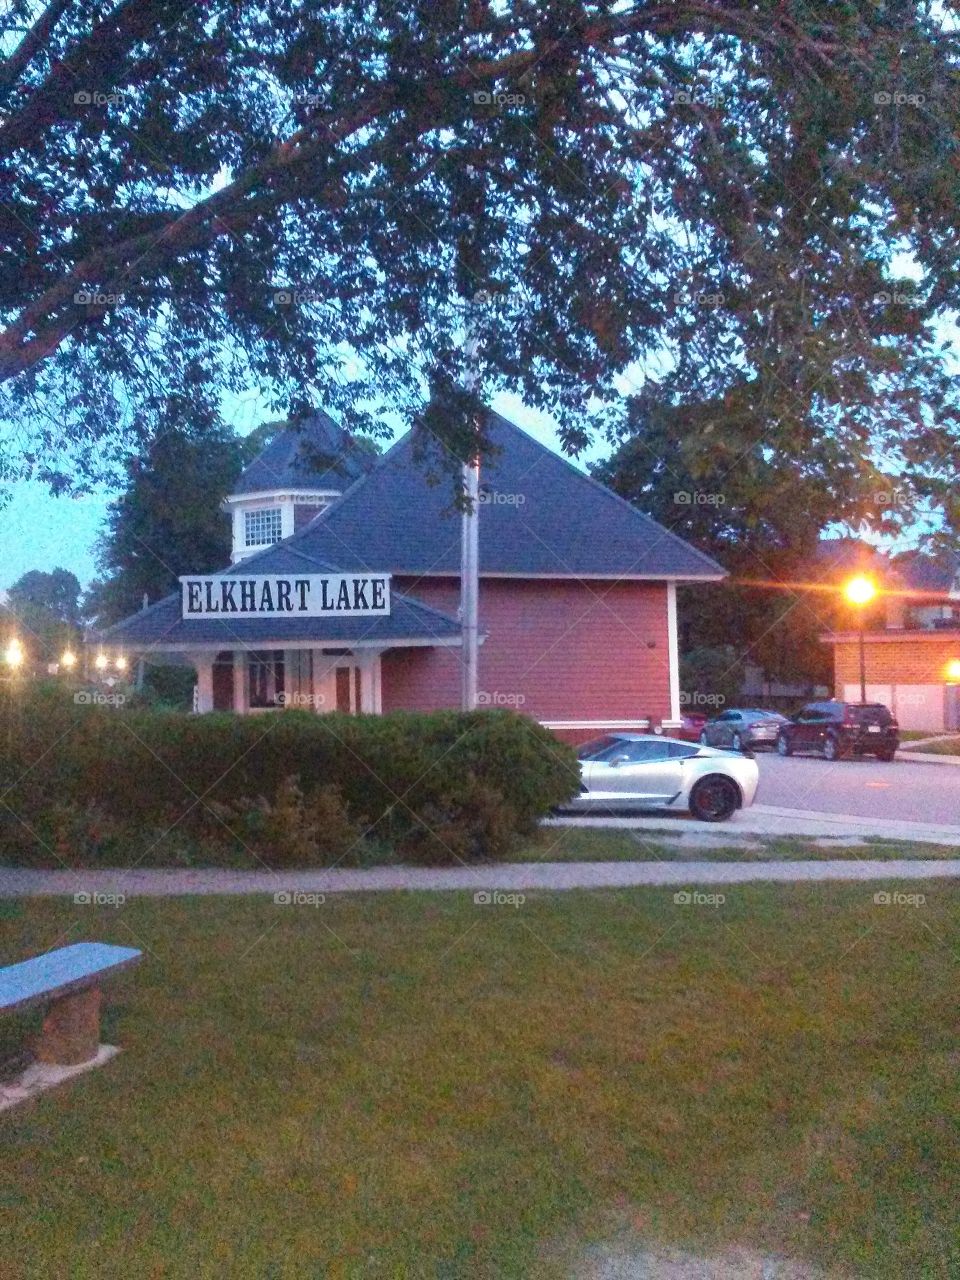 Another view of the train depot  in Elkhart Lake.